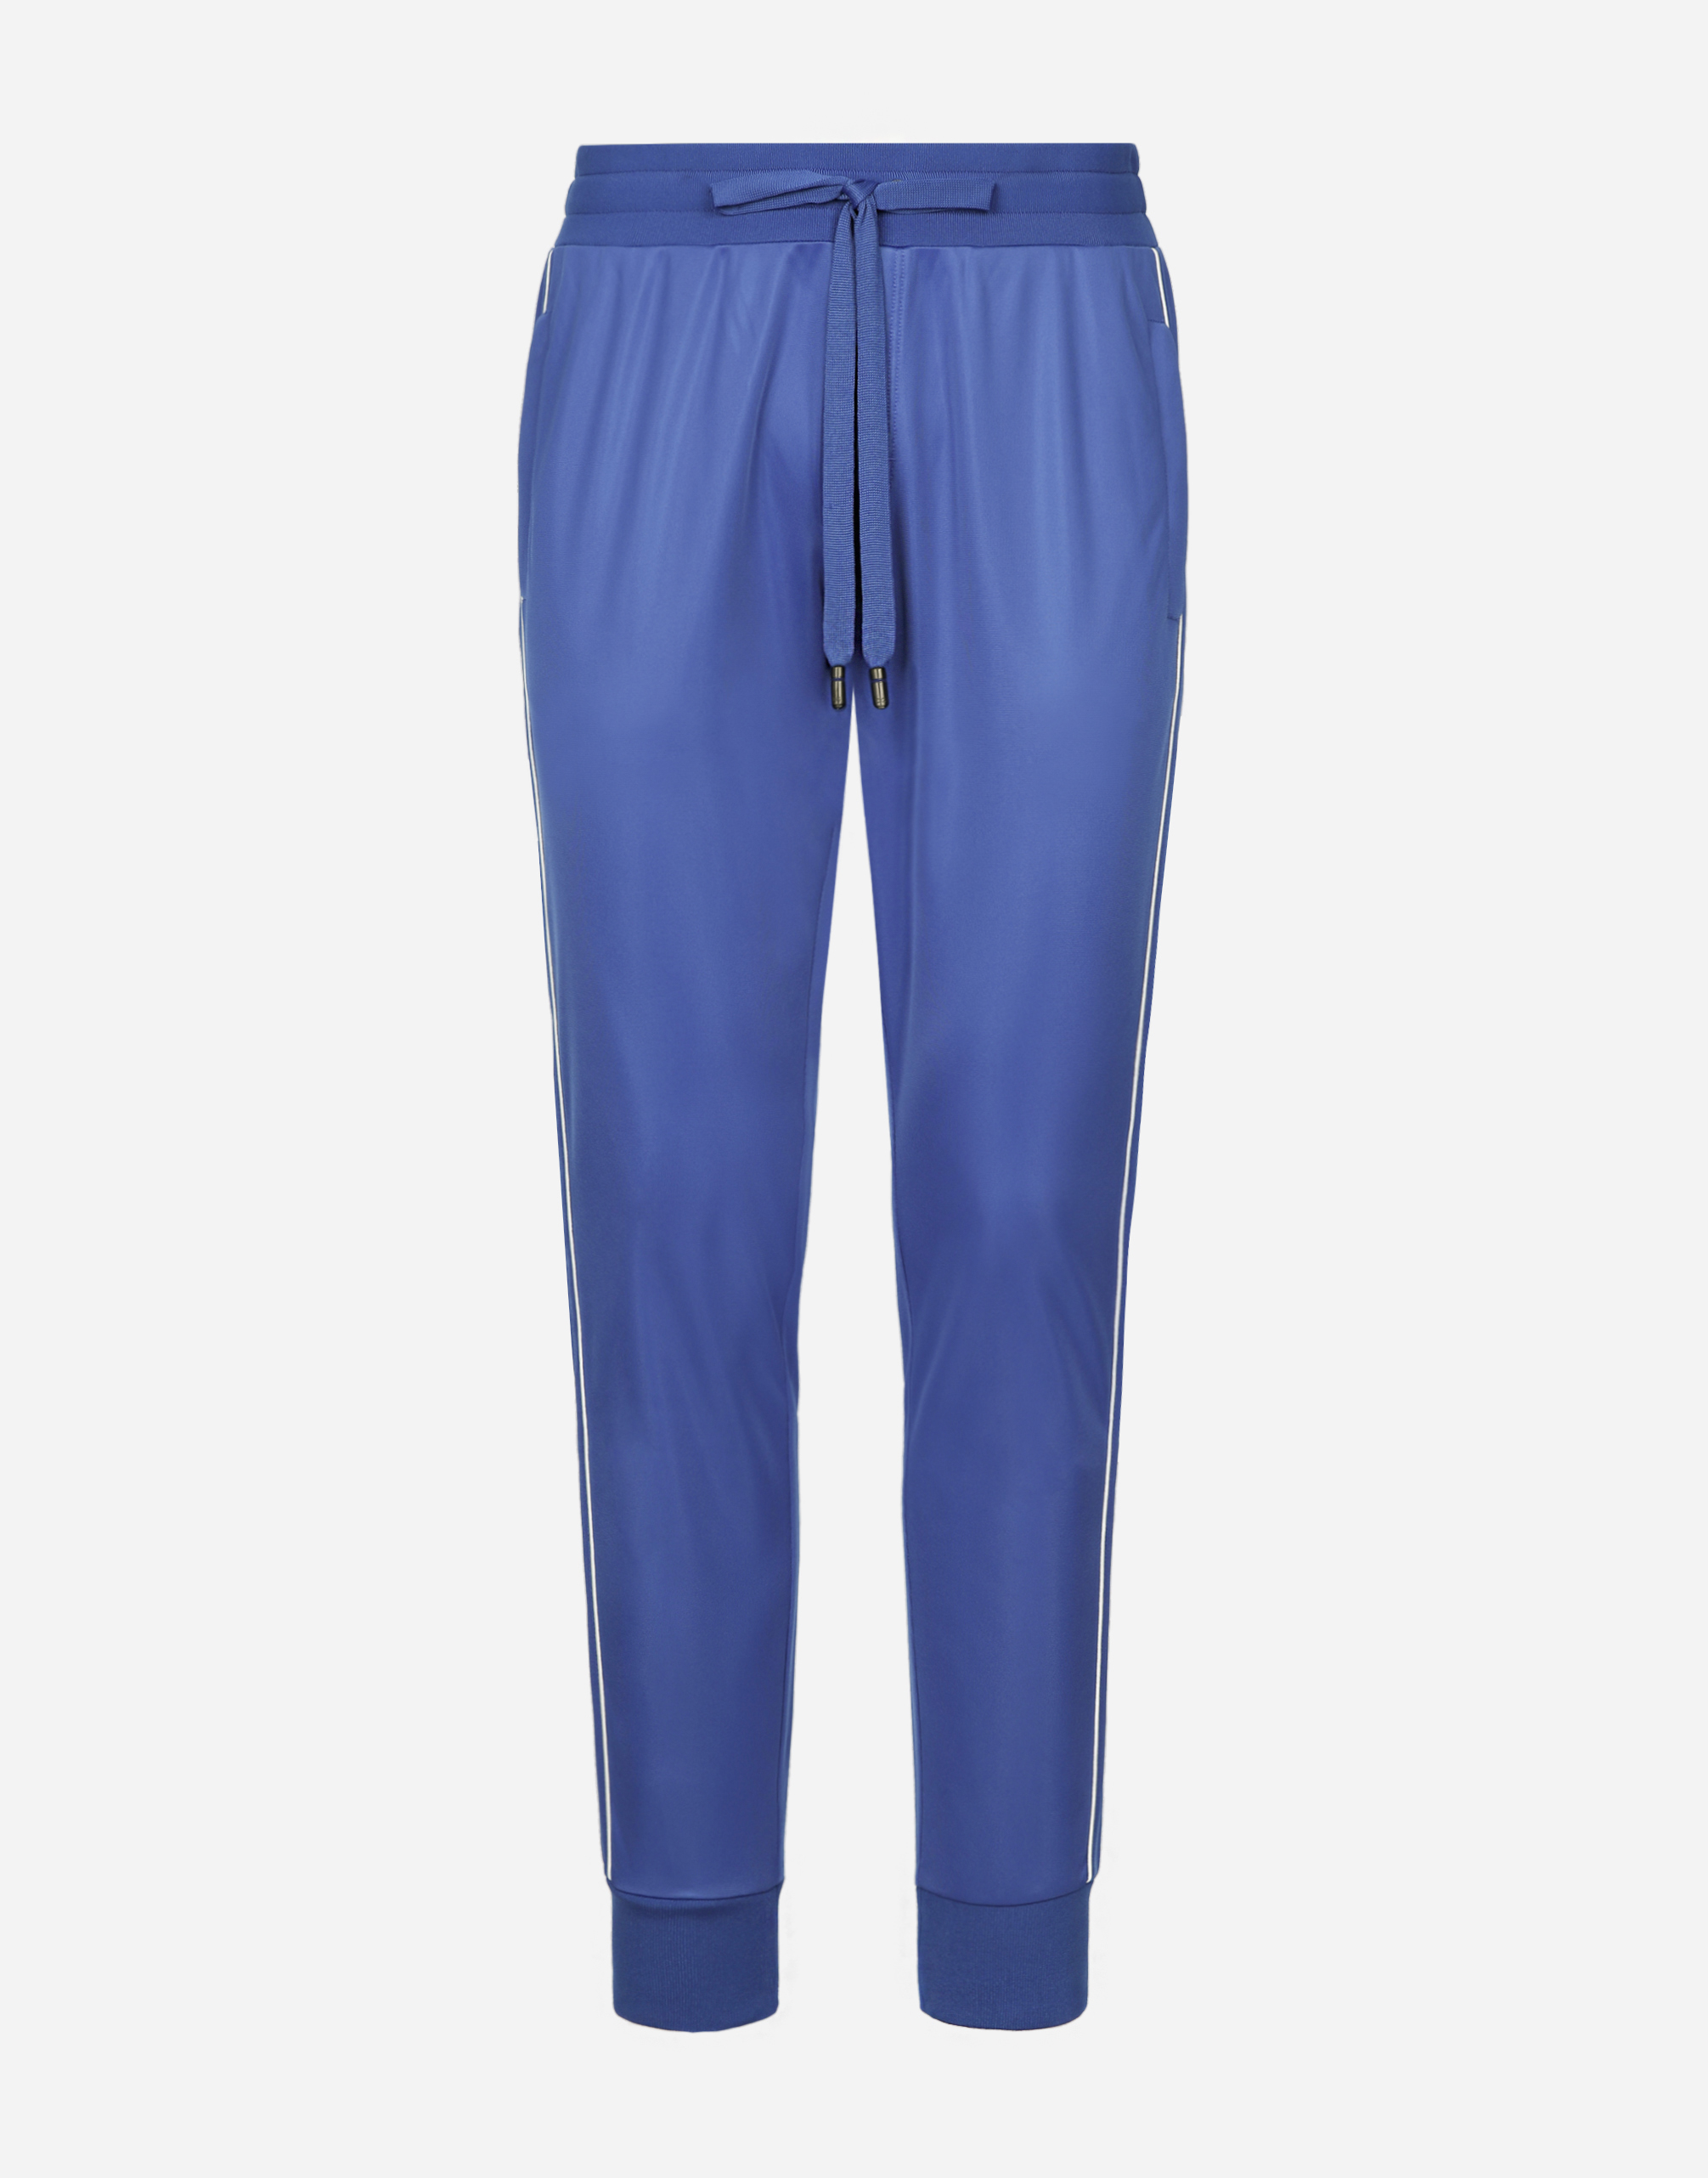 Dolce & Gabbana Triacetate Jogging Pants With Bands In Blue